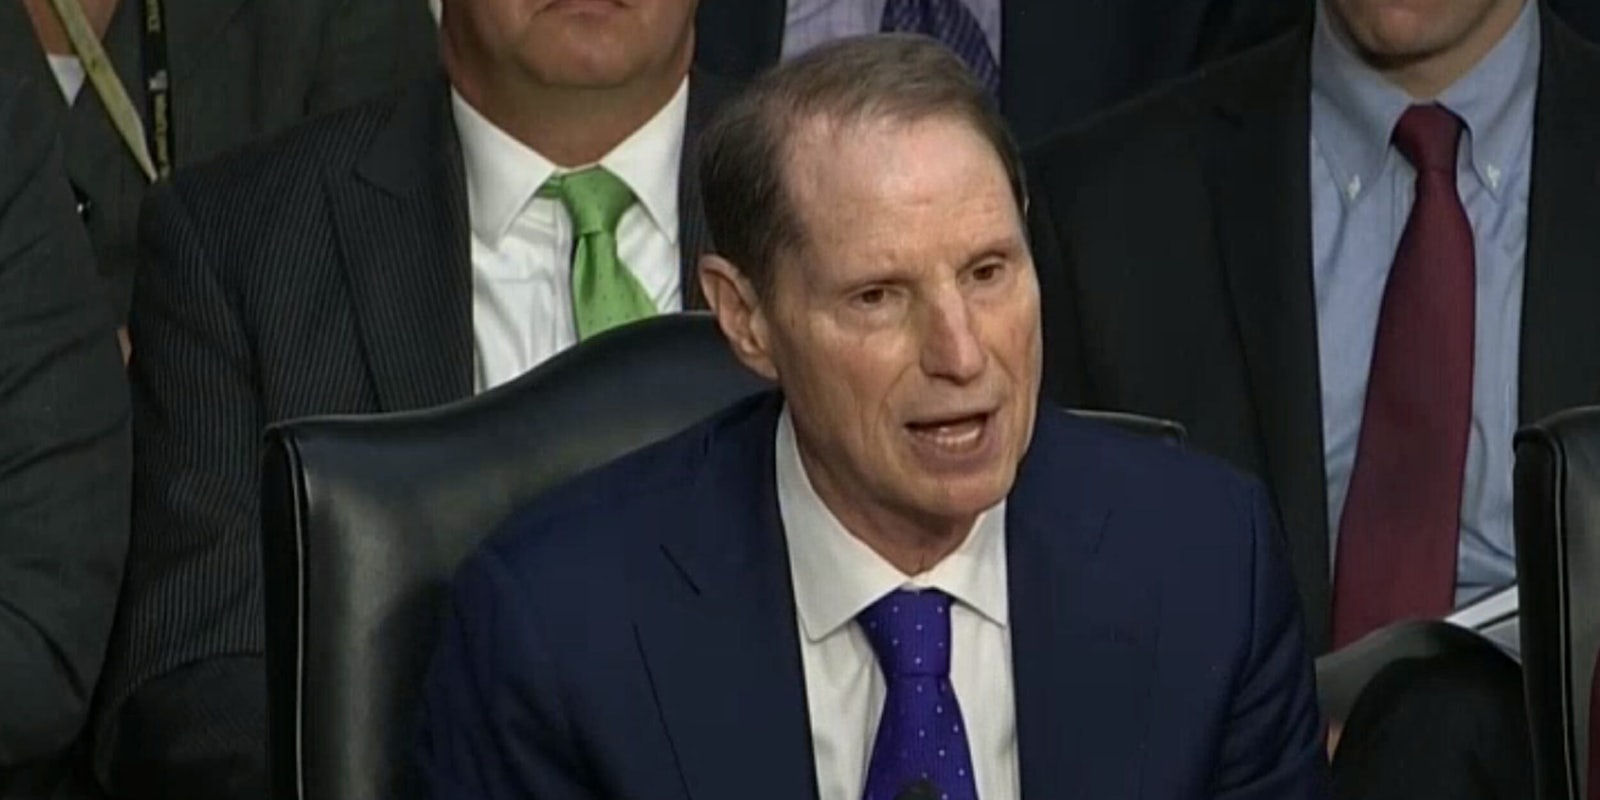 Sen. Ron Wyden (D-Ore.) dug into representatives from Google, Facebook and Twitter during Wednesday's hearing on how those tech companies were infiltrated by Russian actors and puffed up with 'fake news' ahead of the 2016 election and beyond.